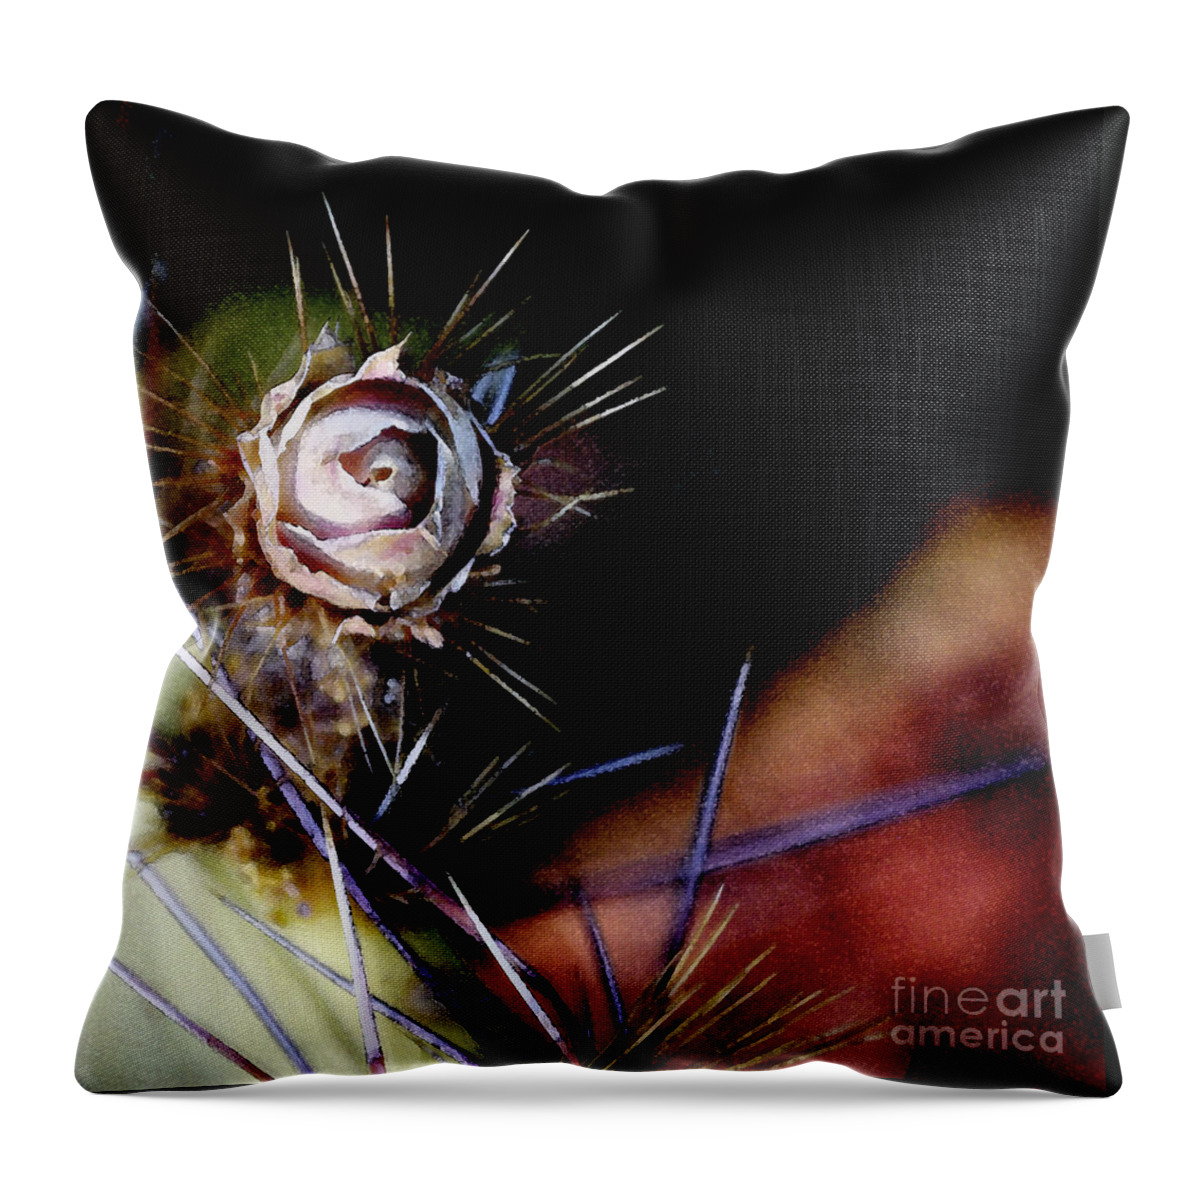 Rose Throw Pillow featuring the photograph Sedona's Desert Rose by Linda Shafer